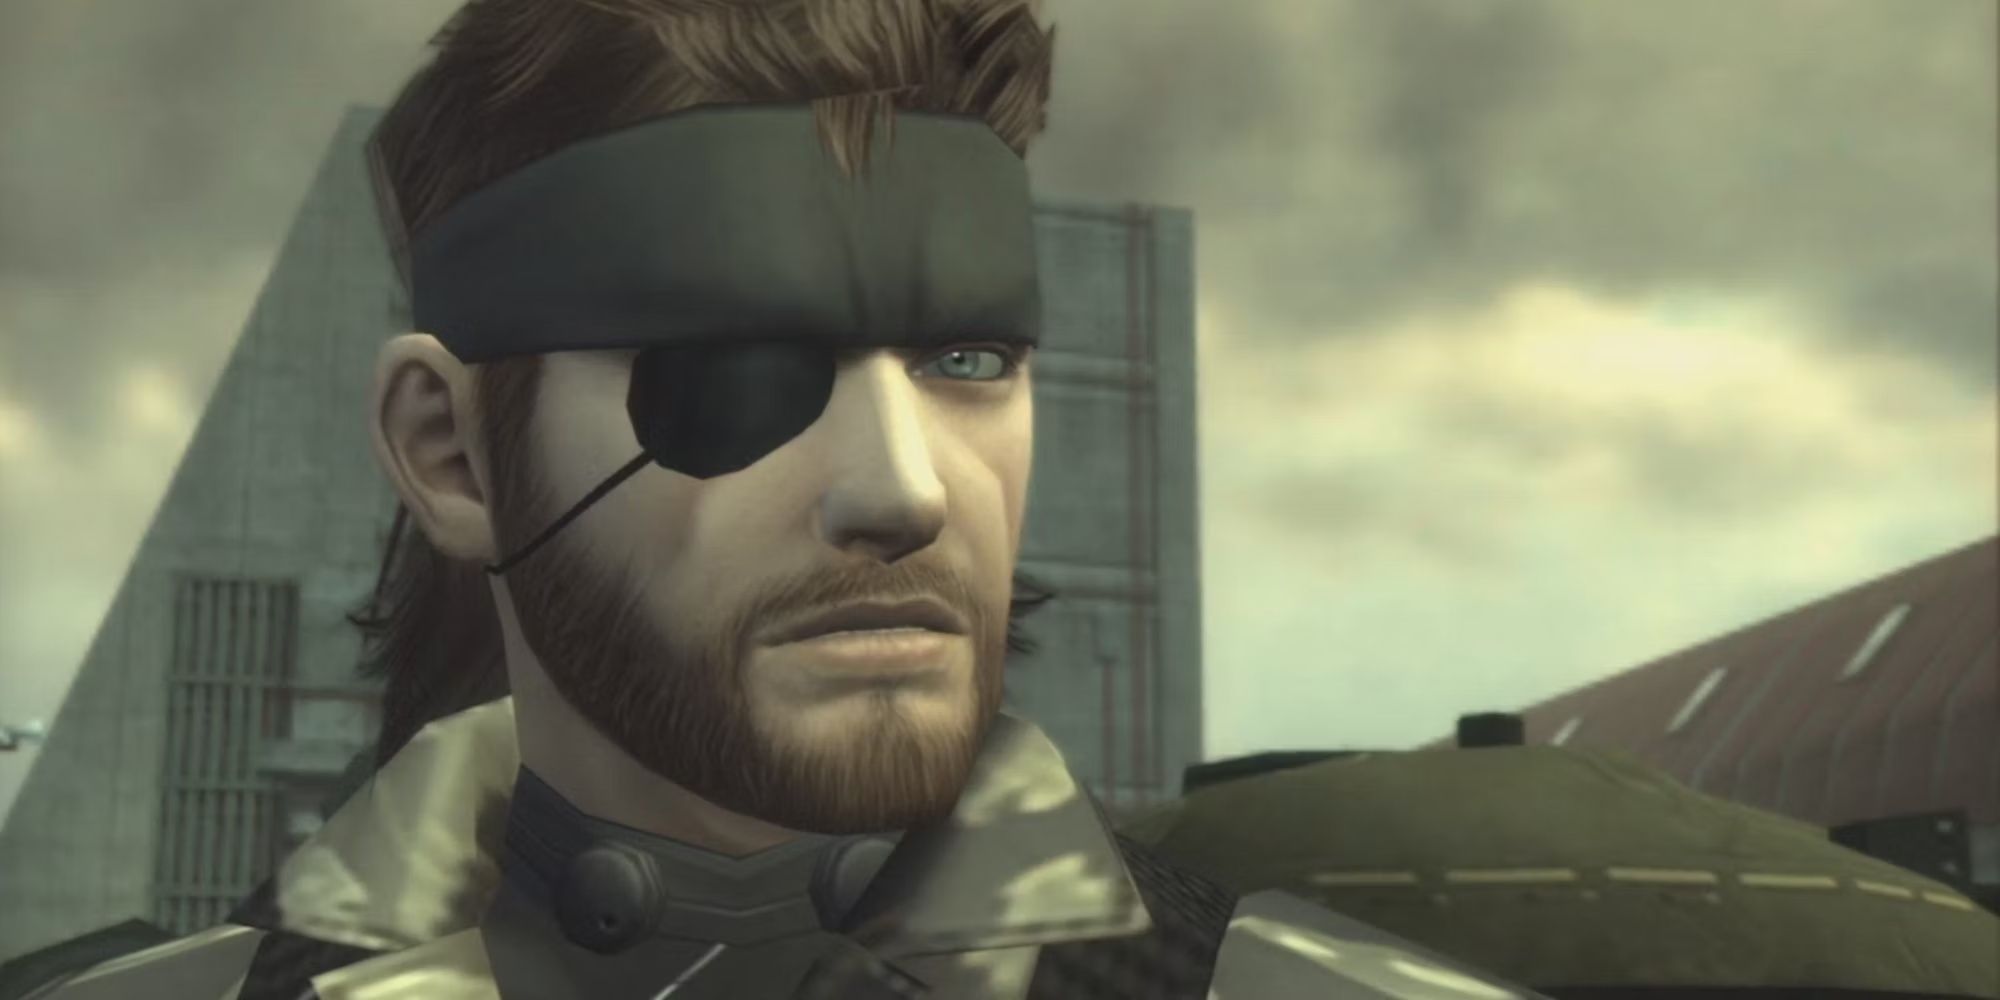 Big Boss towards the end of MGS3